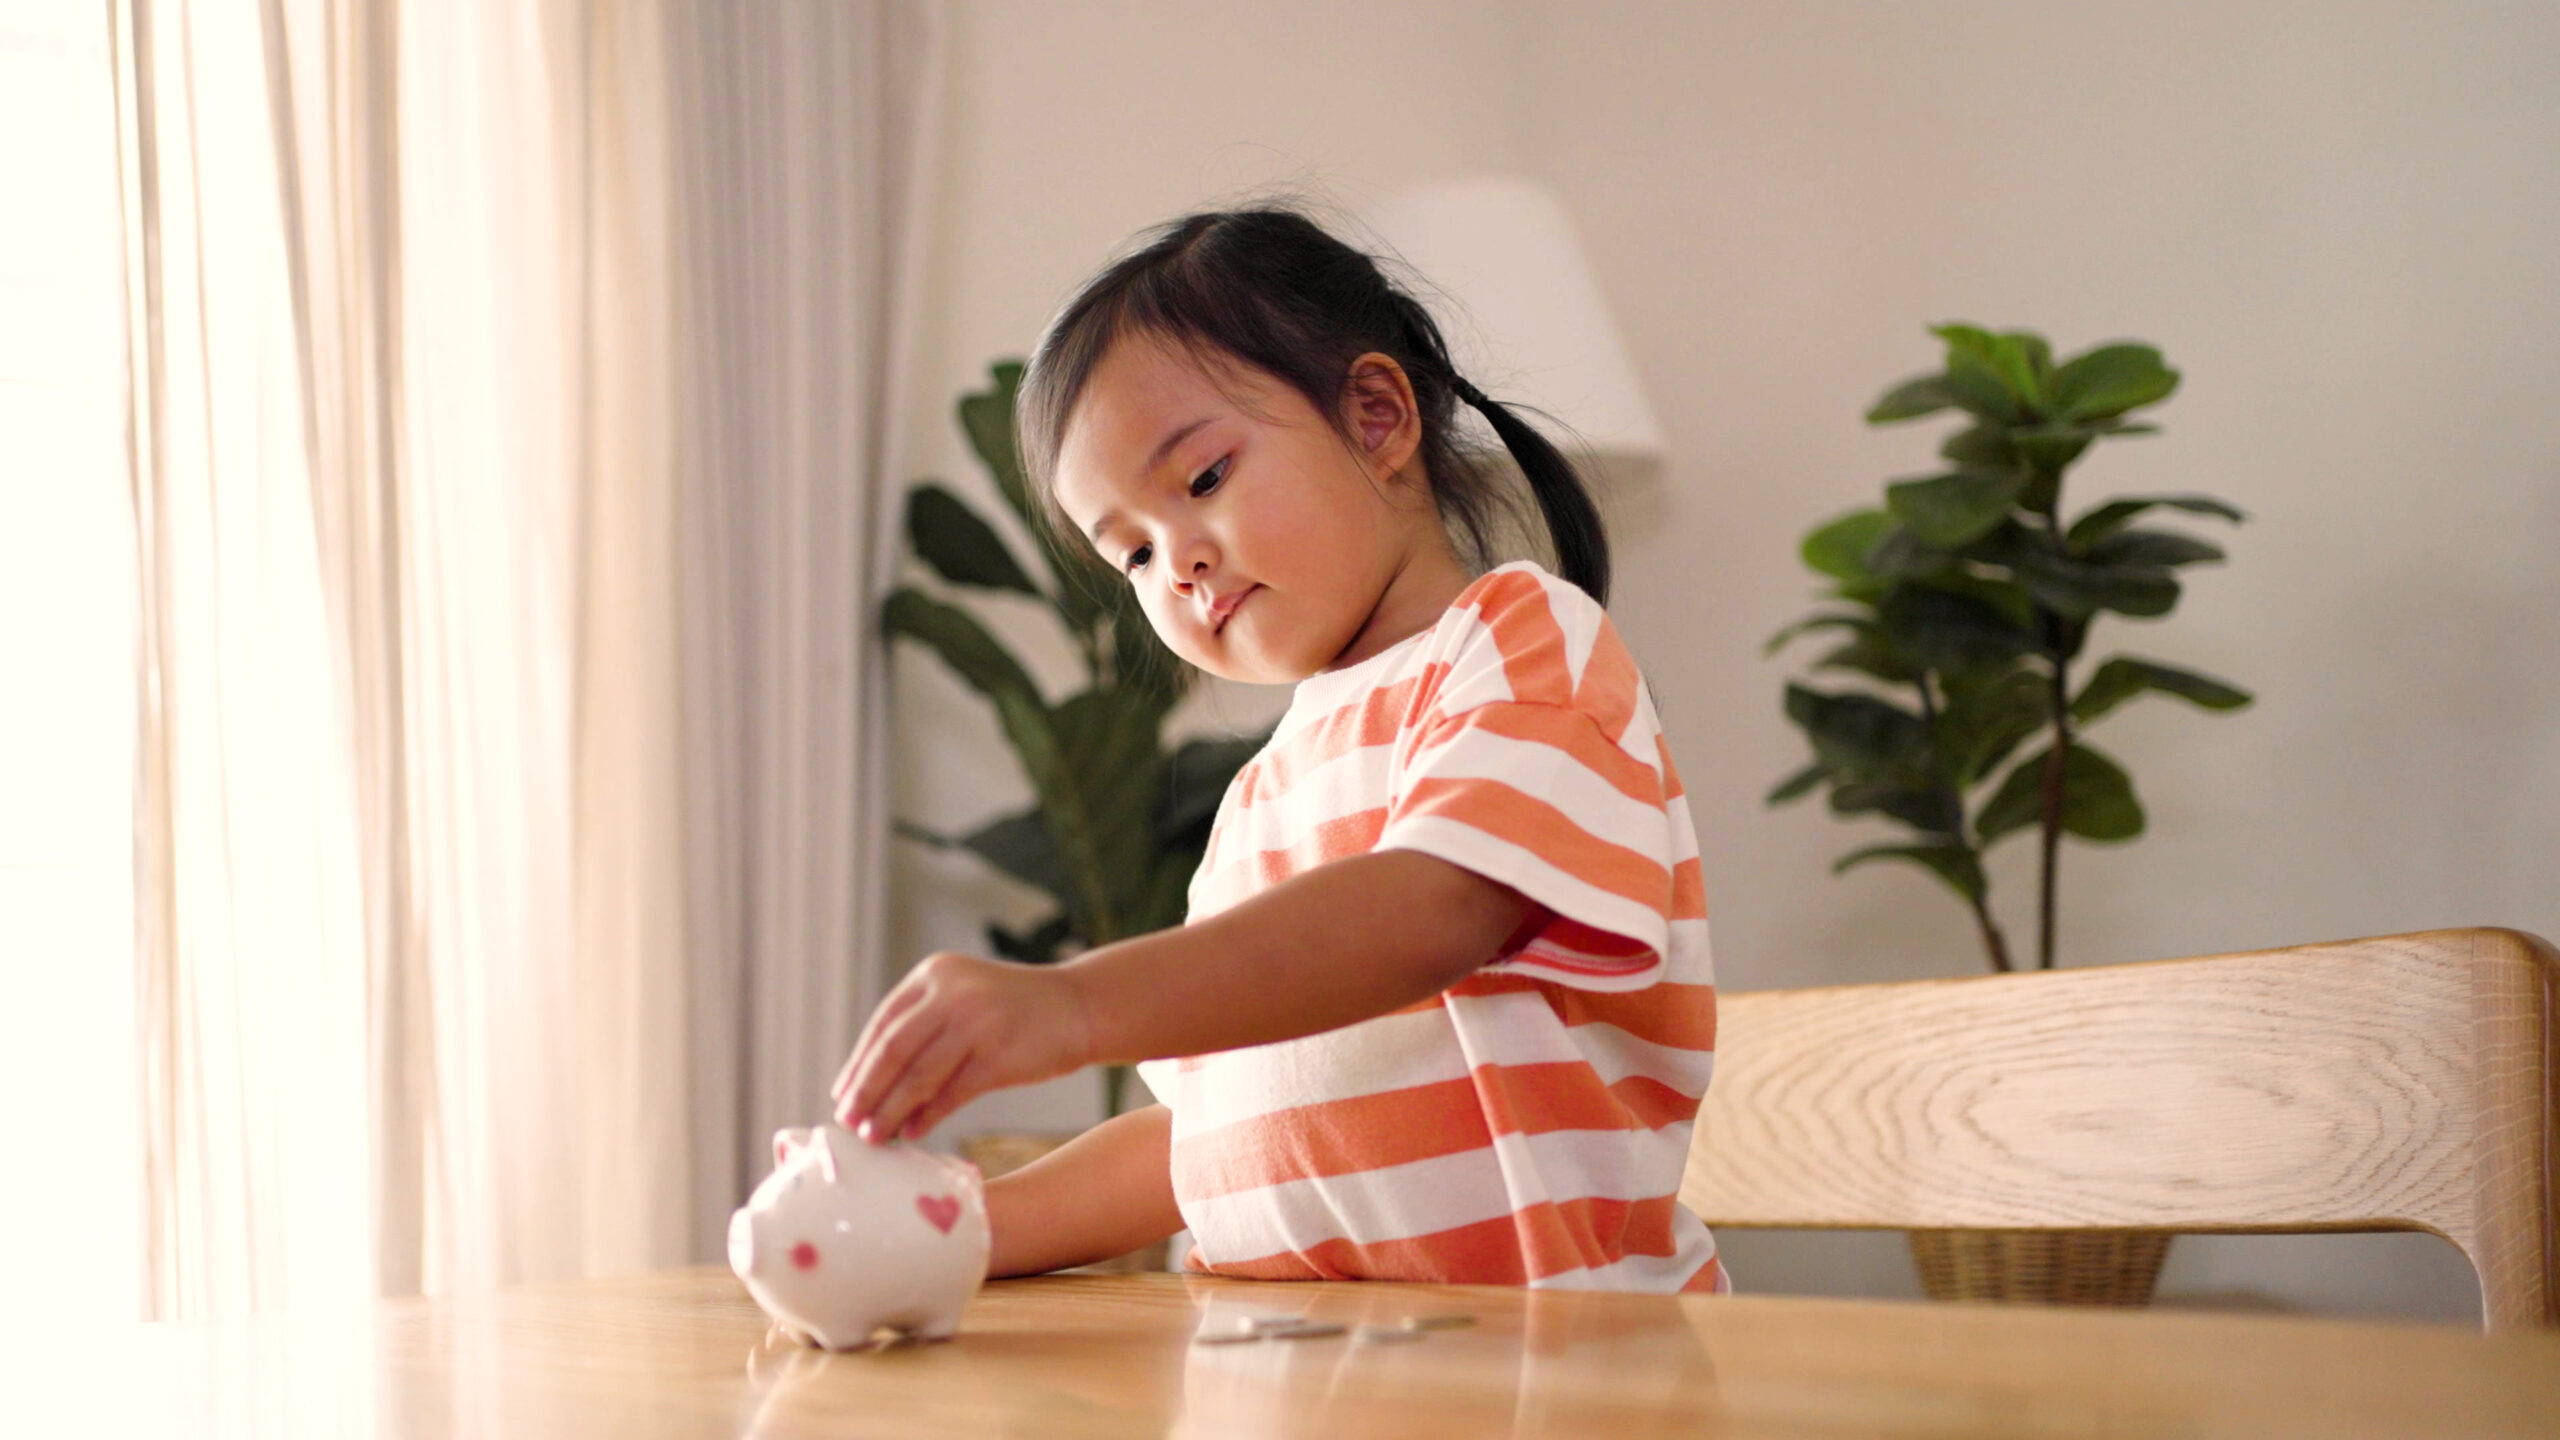 Young girl putting coins into a piggy bank